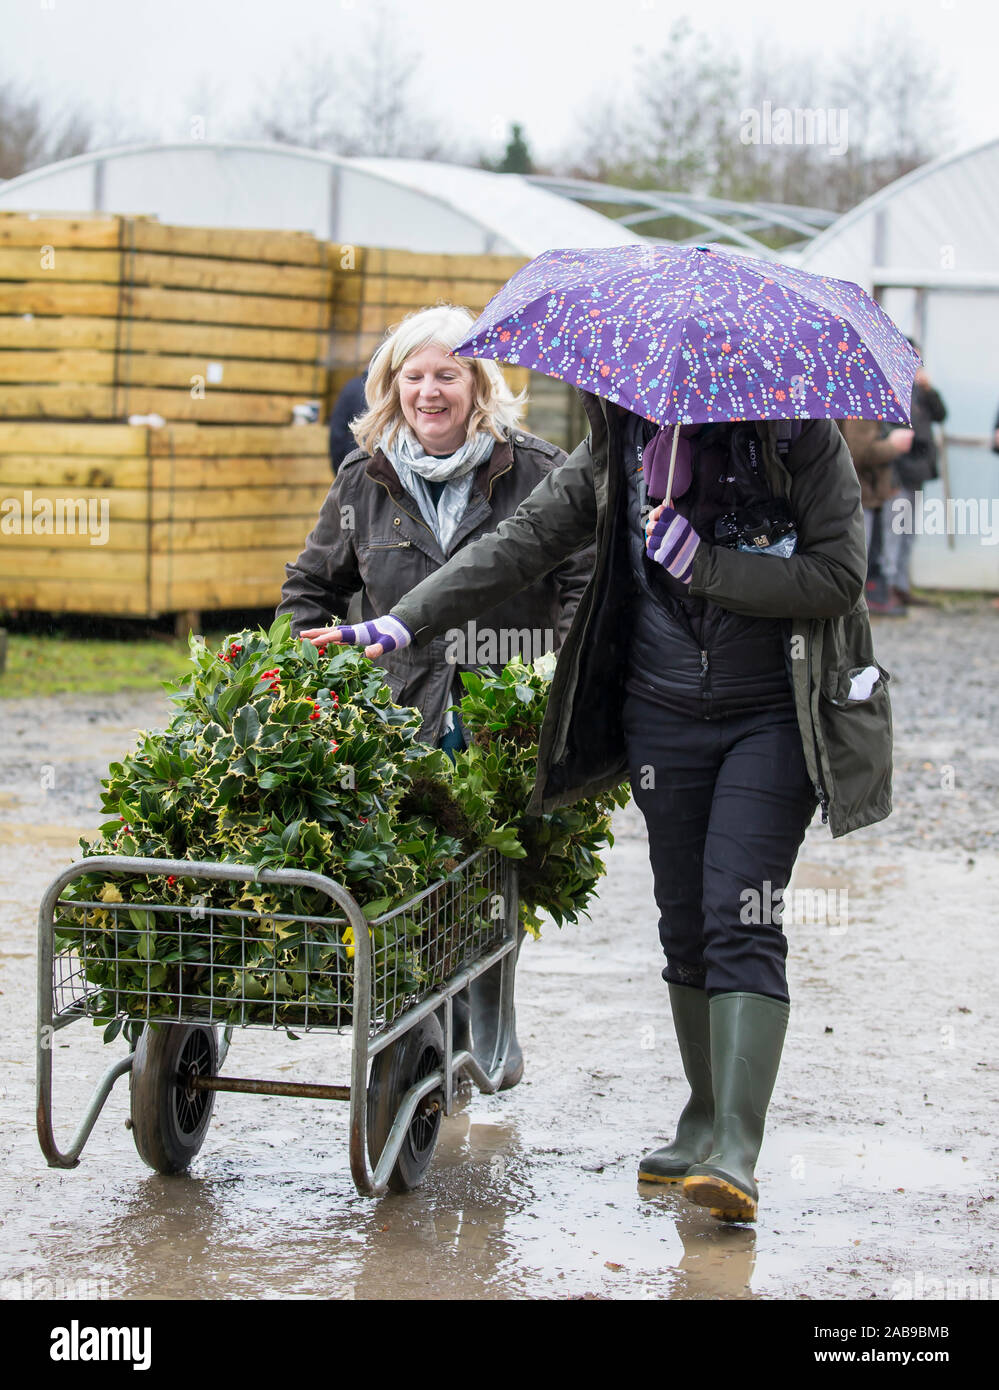 Tenbury Wells, UK. 26th Nov, 2019. In spite of the wet and dreary weather, nothing dampens the spirit of these UK buyers as they flock to the Worcestershire town of Tenbury Wells for the annual Mistletoe and Holly Auction. With UK farmers and growers offering such a staggering selection of freshly-cut, berry-laden lots for this event, buyers travel from far and wide to secure the finest festive foliage for their business' countdown to Christmas. Happy retailers return to their vehicles, trollies overflowing with successful purchases of premium evergreens! Credit: Lee Hudson/Alamy Live News Stock Photo